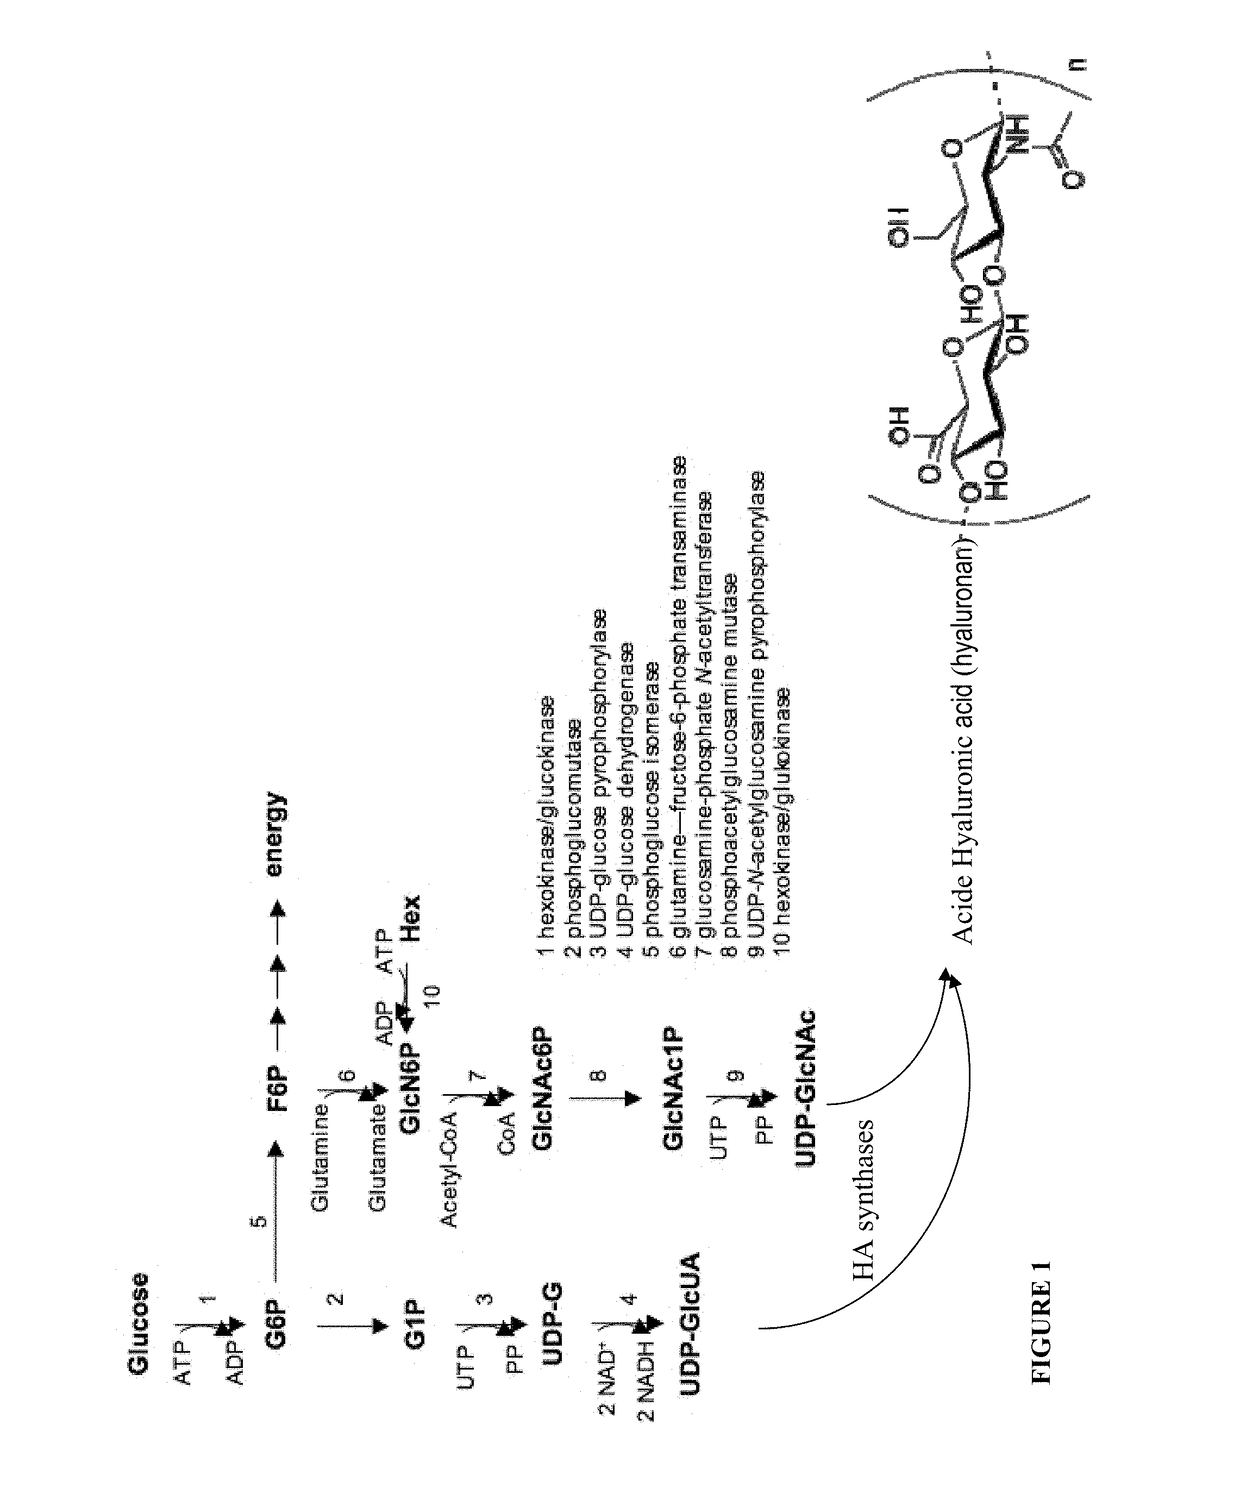 Cosmetic and pharmaceutical composition comprising N-acetylglucosamine-6-phosphate